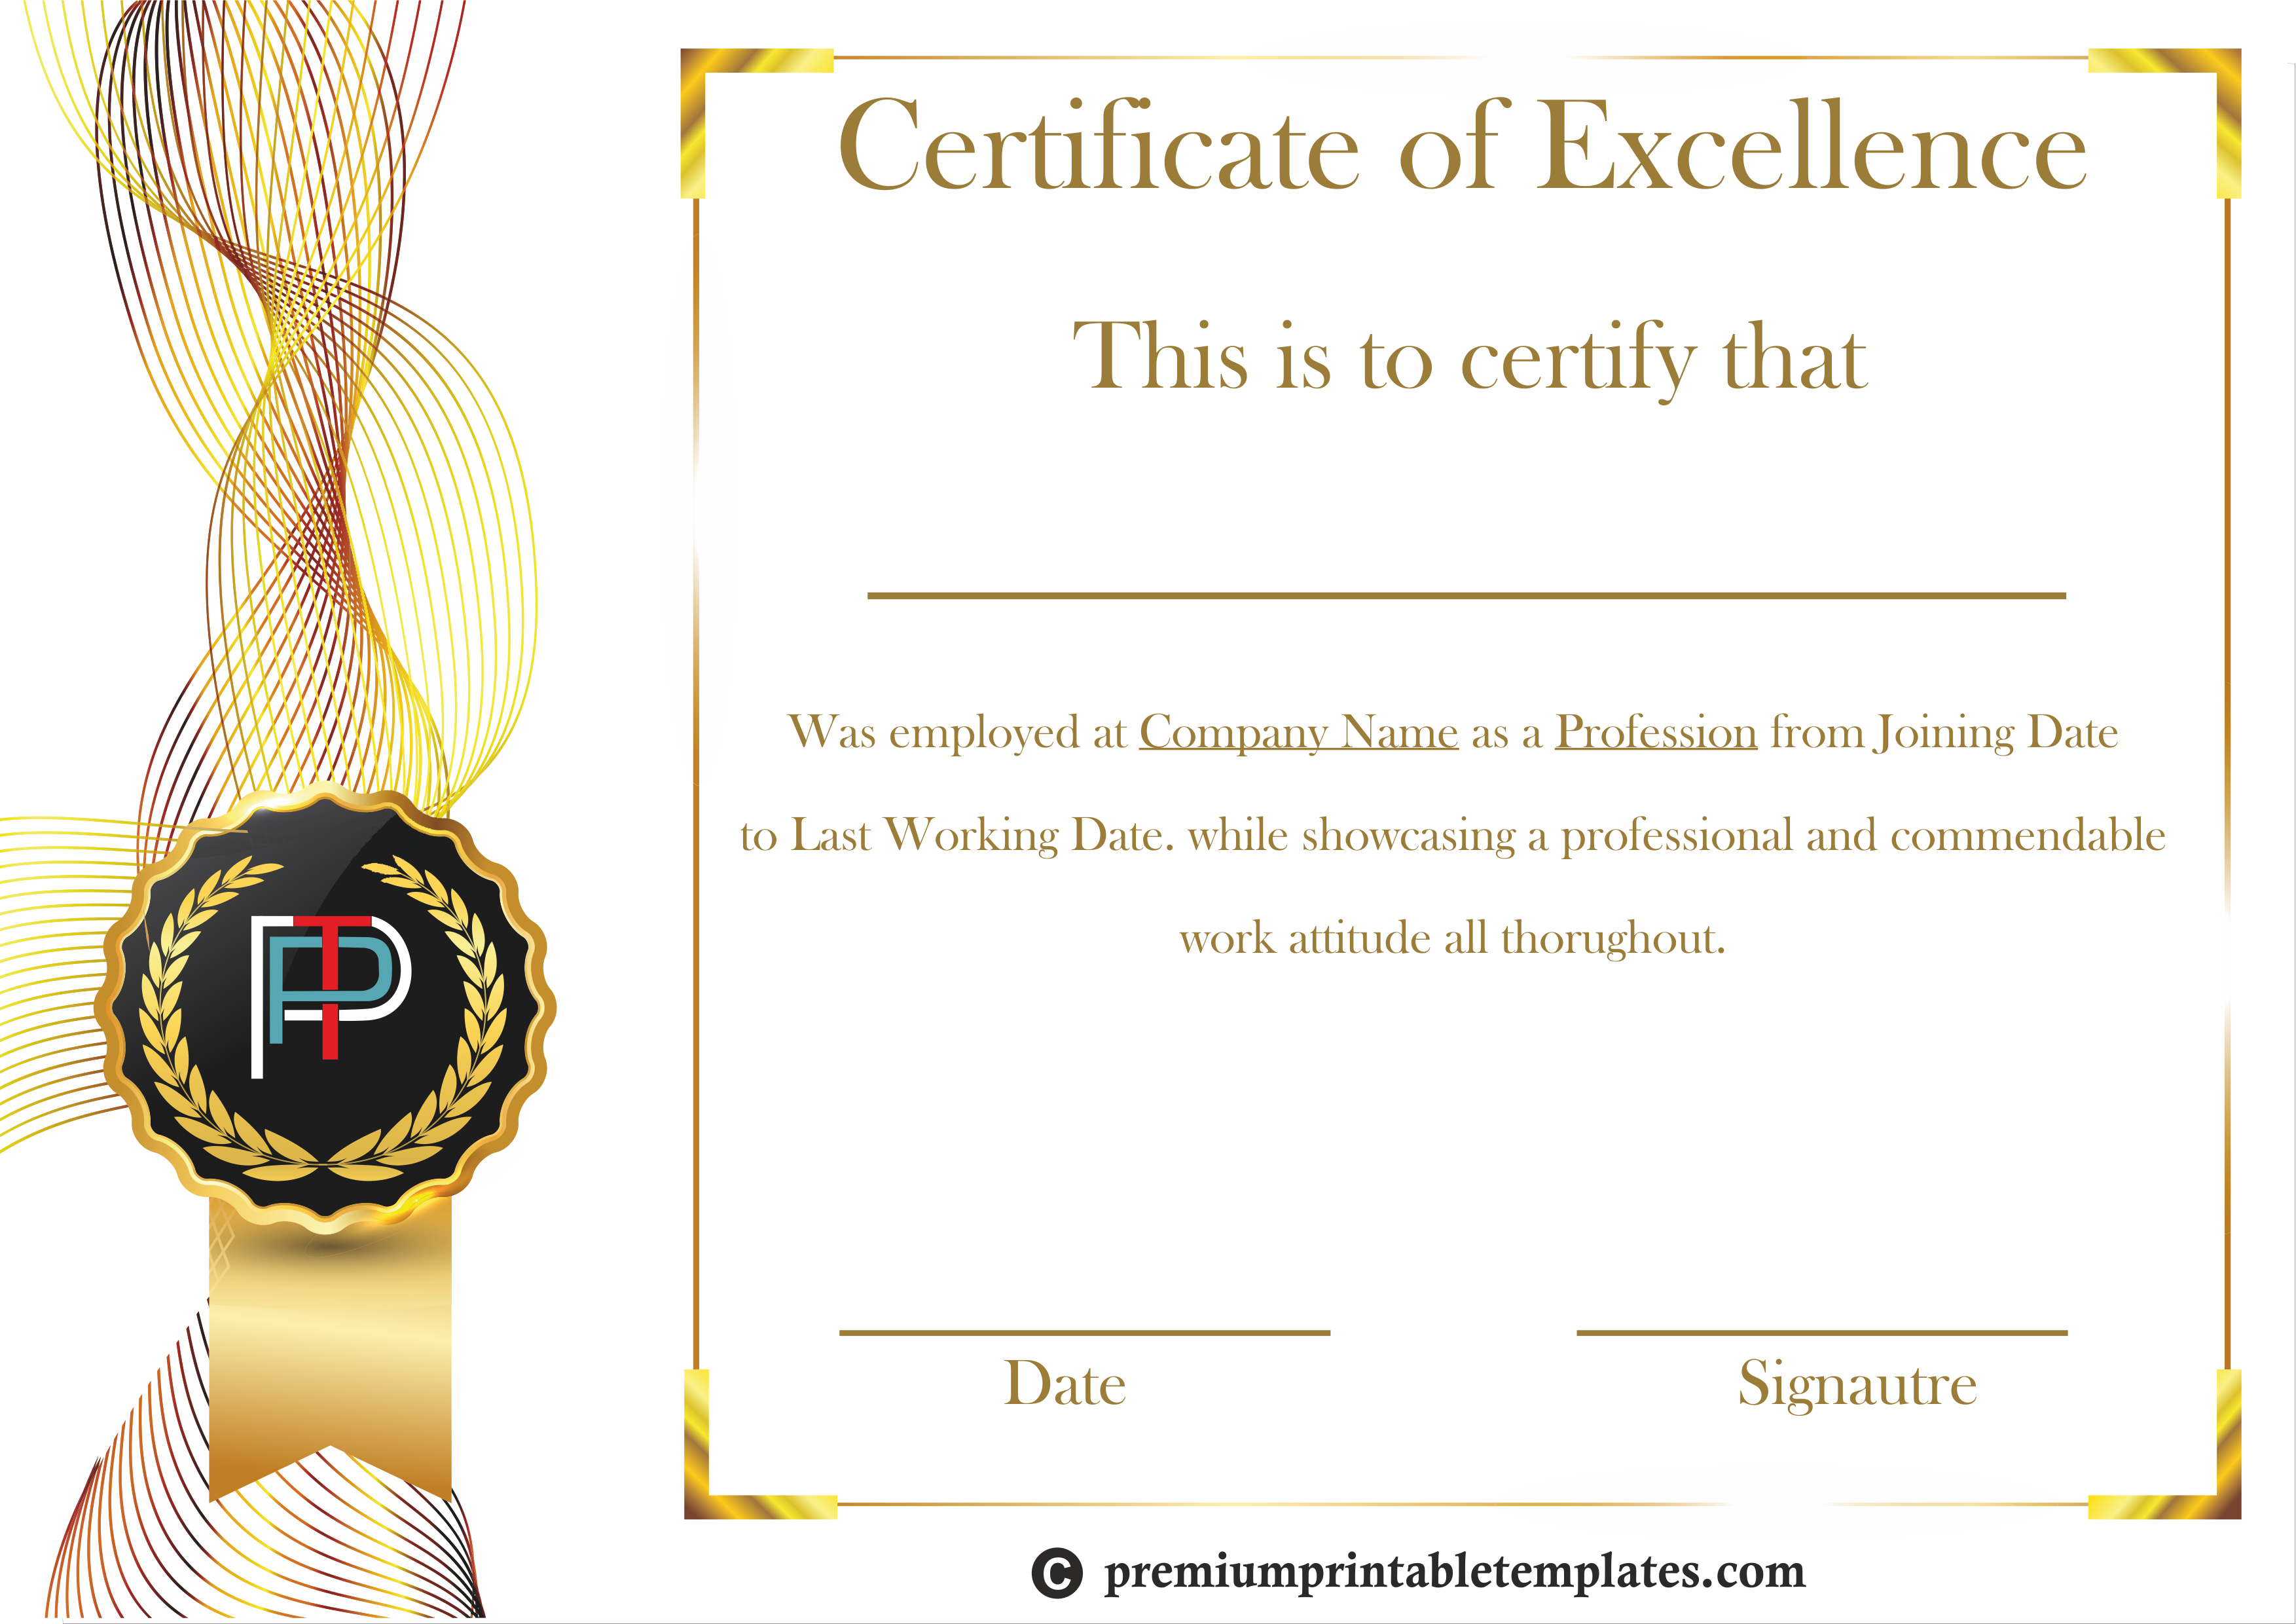 Certificate Of Excellence Template | Certificate Design In Best Performance Certificate Template